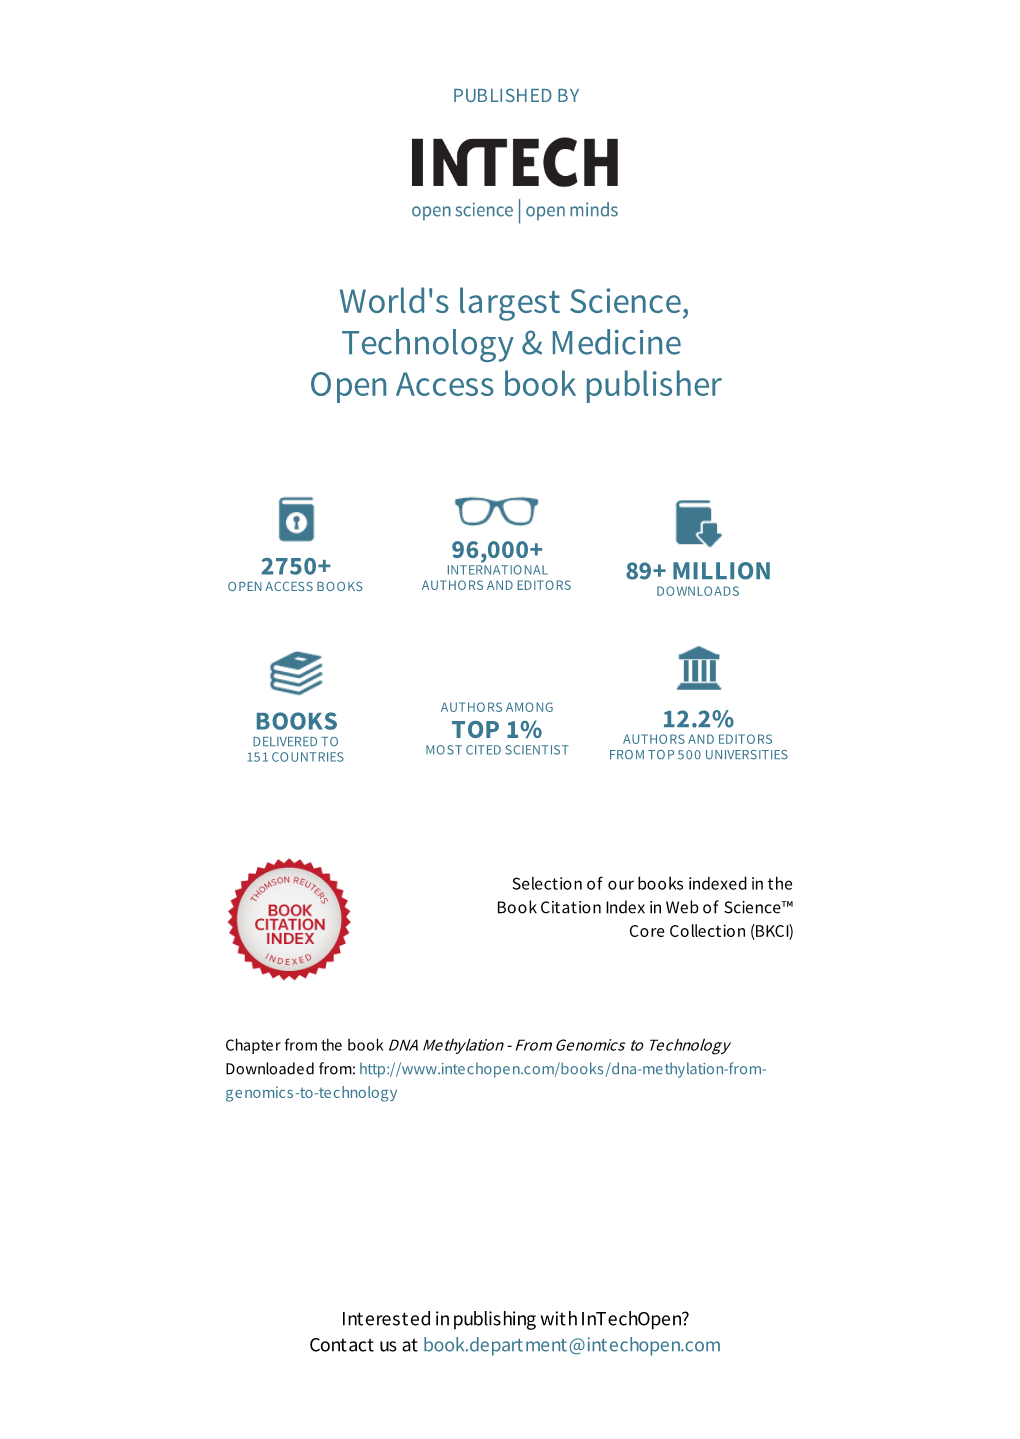 World's Largest Science, Technology & Medicine Open Access Book